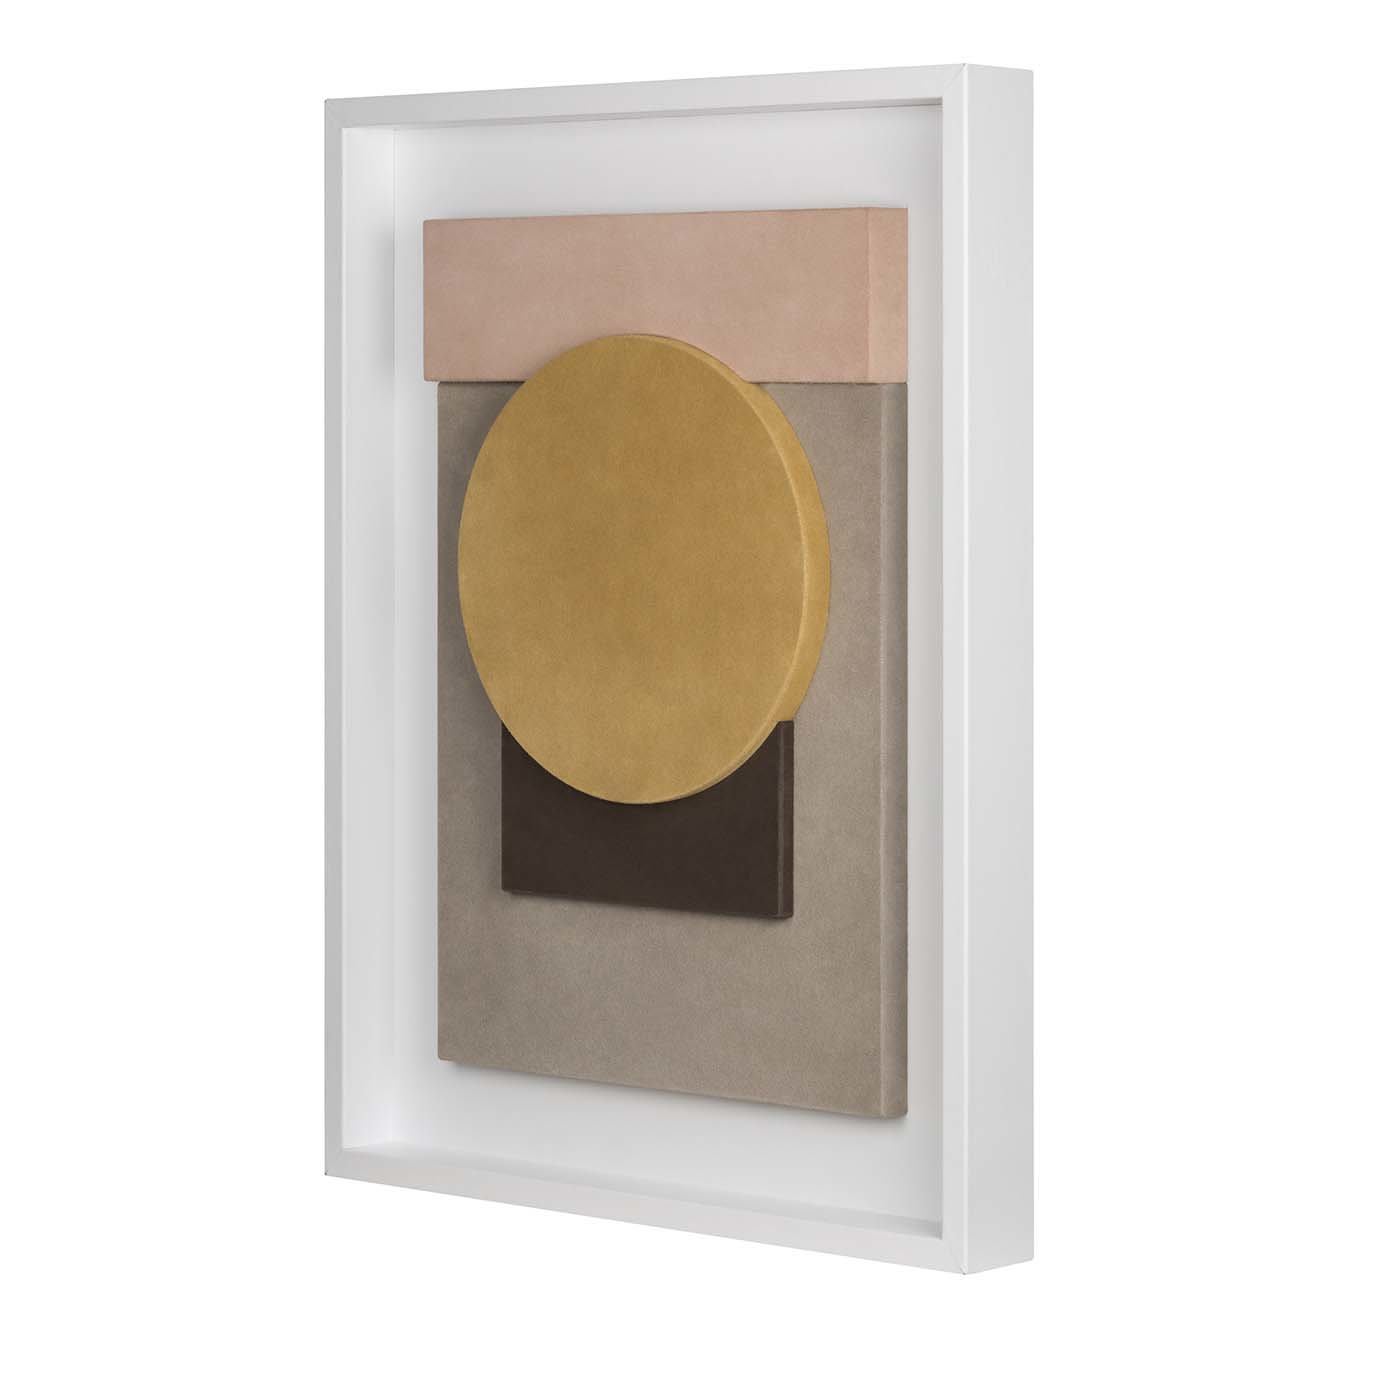 Tabou Decorative Wall Sculpture with White Frame #5 - Giobagnara